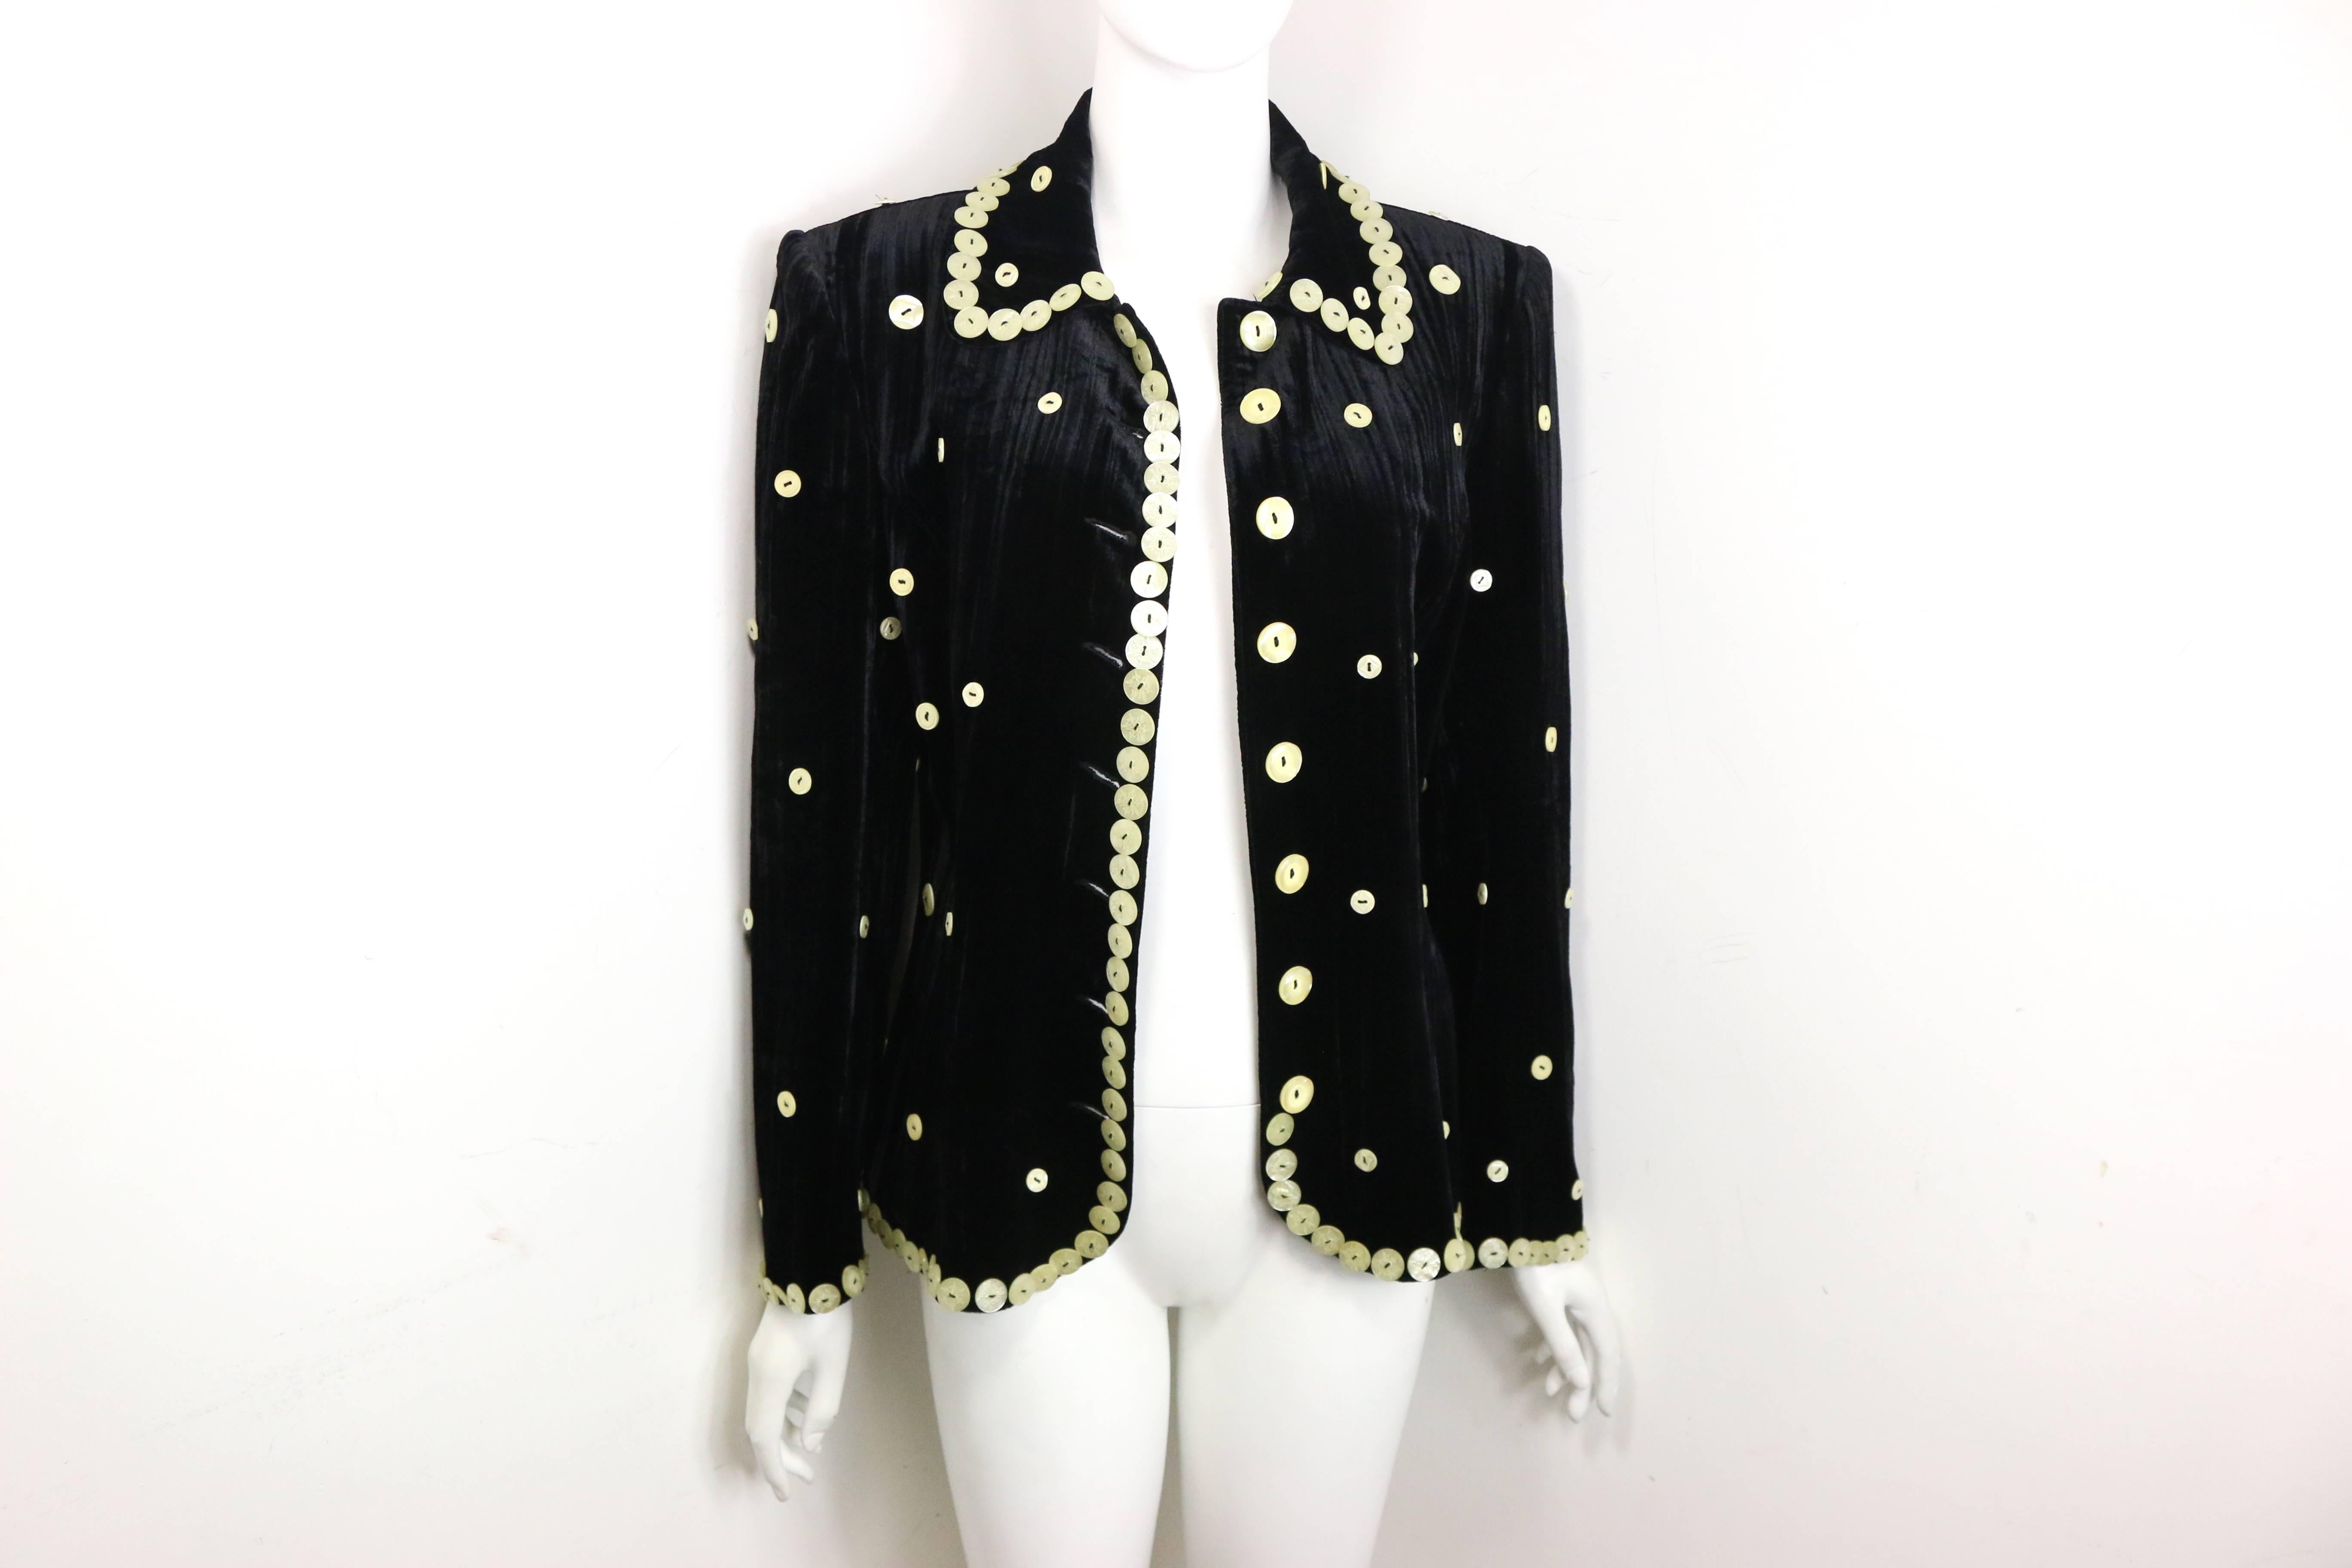 - Vintage 90s Frank Sorbier Haute Couture black velvet jacket. 

- Featuring embedded Mother of Pearl buttons throughout the jacket. 

- Mother of Pearls buttons closure. 

- Size 40. 

- 82% Viscose, 12% Silk. 

- Never been worn before that